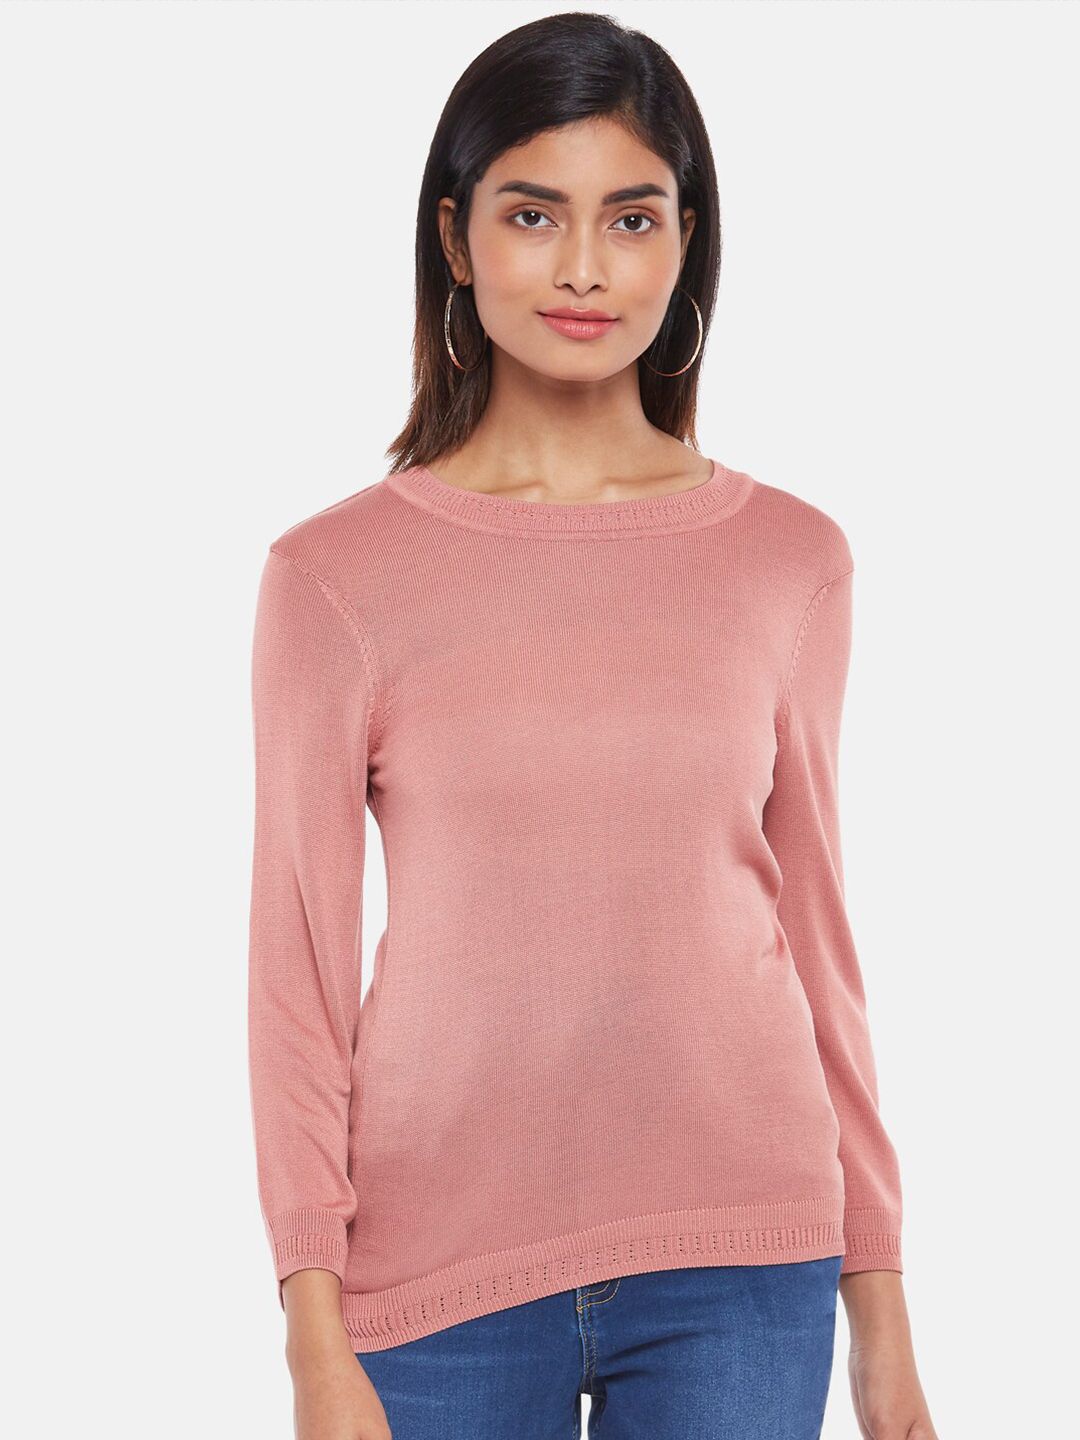 Honey by Pantaloons Women Pink Solid Viscose Rayon Pullover Price in India